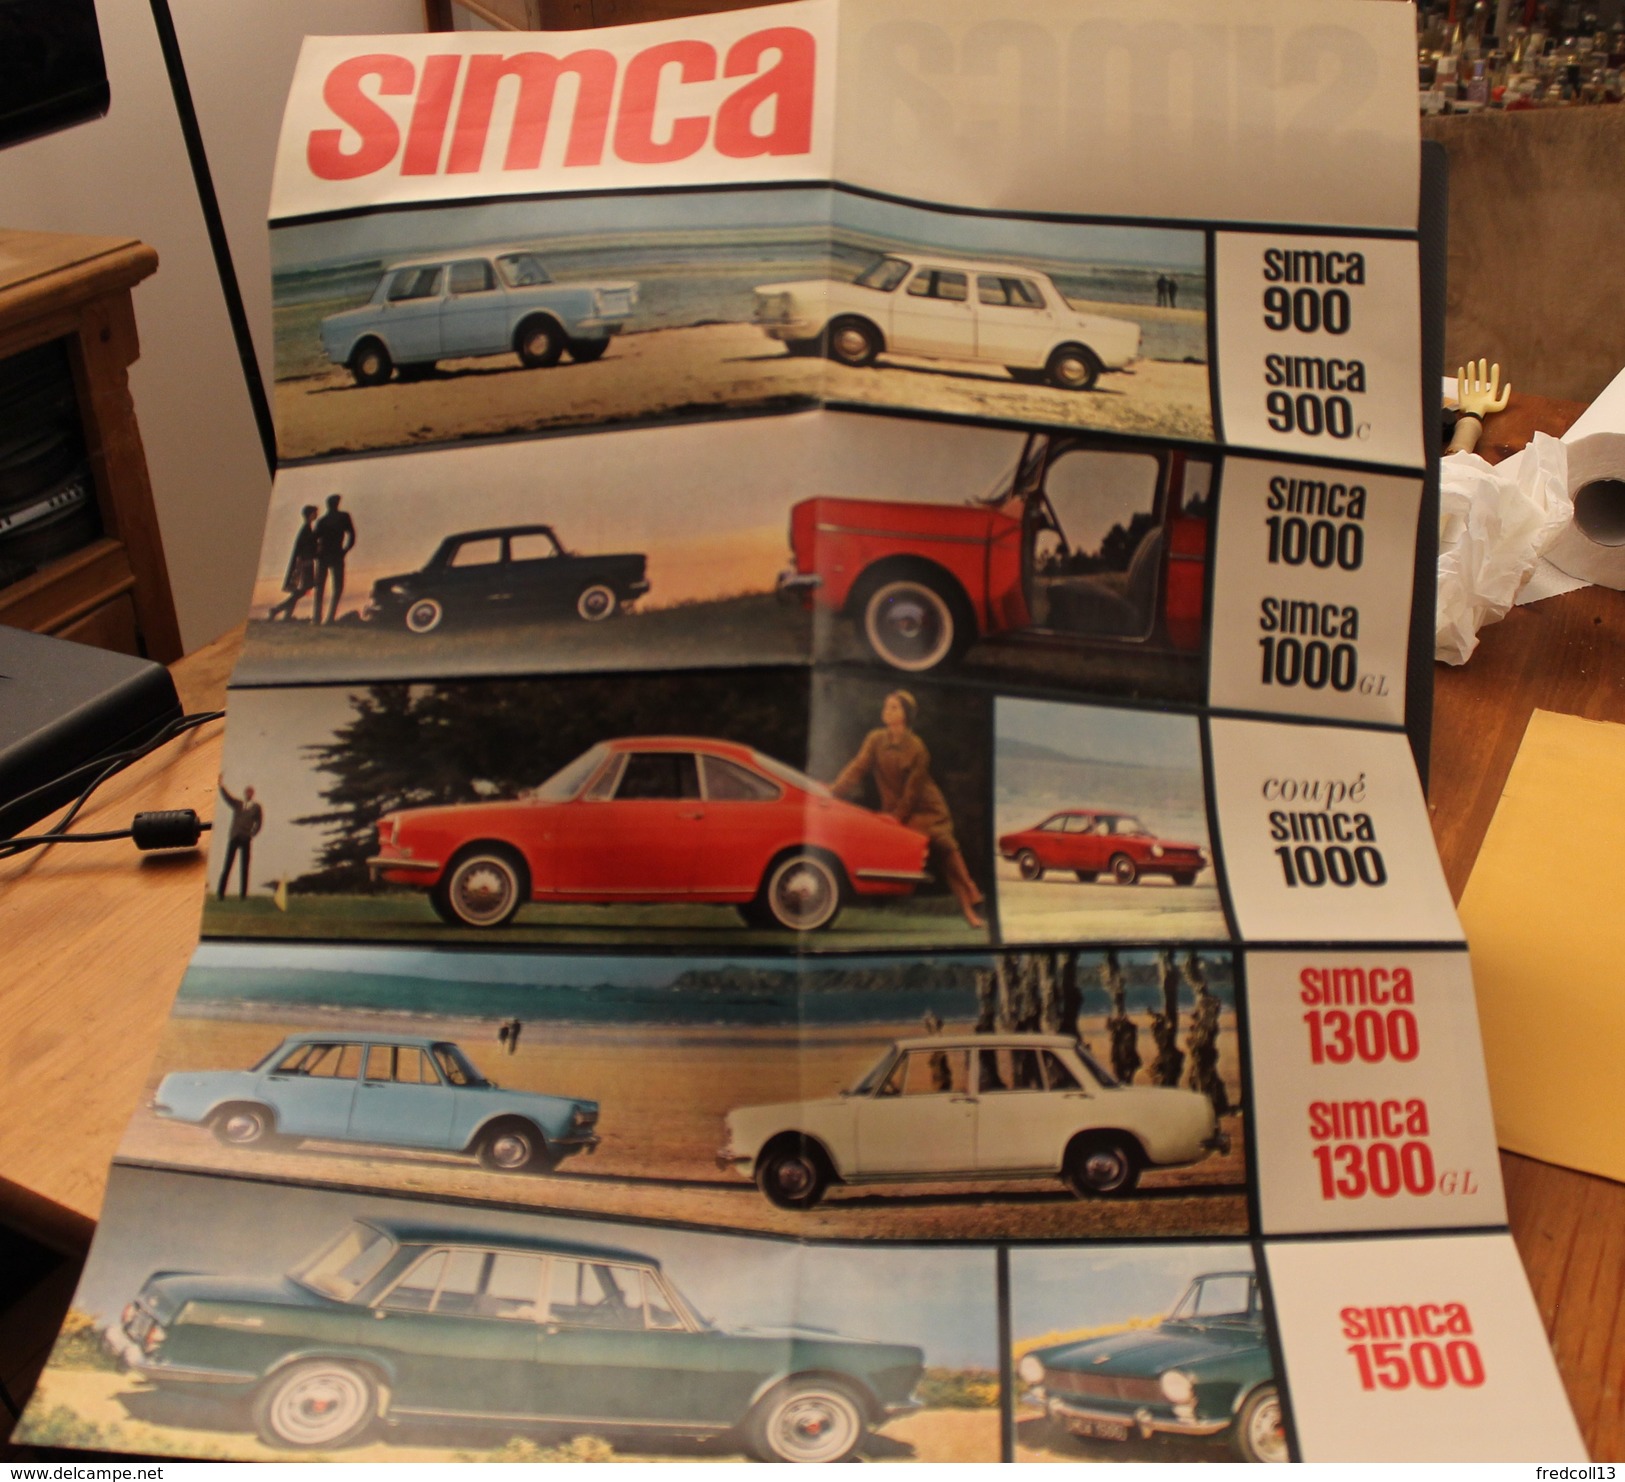 SIMCA GAMME 64 CATALOGUE 12 VOLETS 1969 Format 21 X 9 FRANCE - Advertising